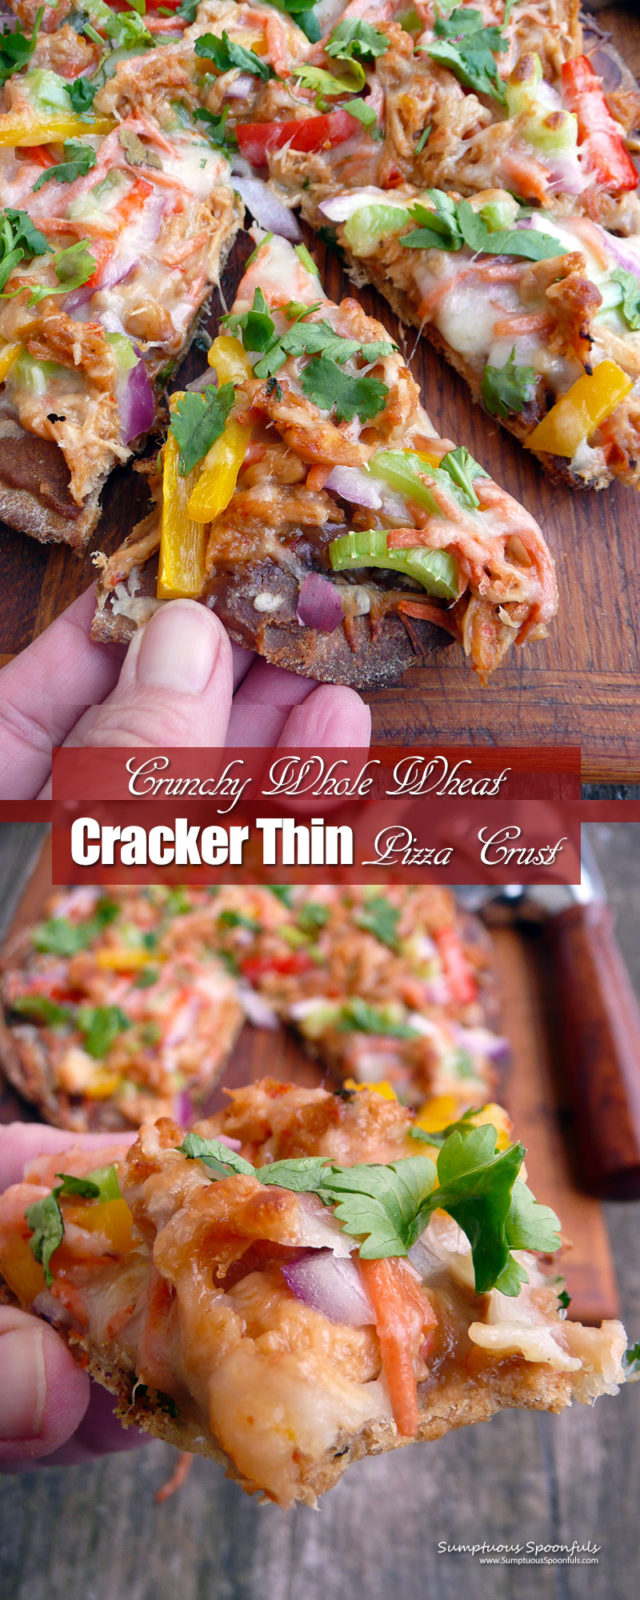 Crunchy Whole Wheat Cracker Thin Pizza Crust Sumptuous Spoonfuls 9270